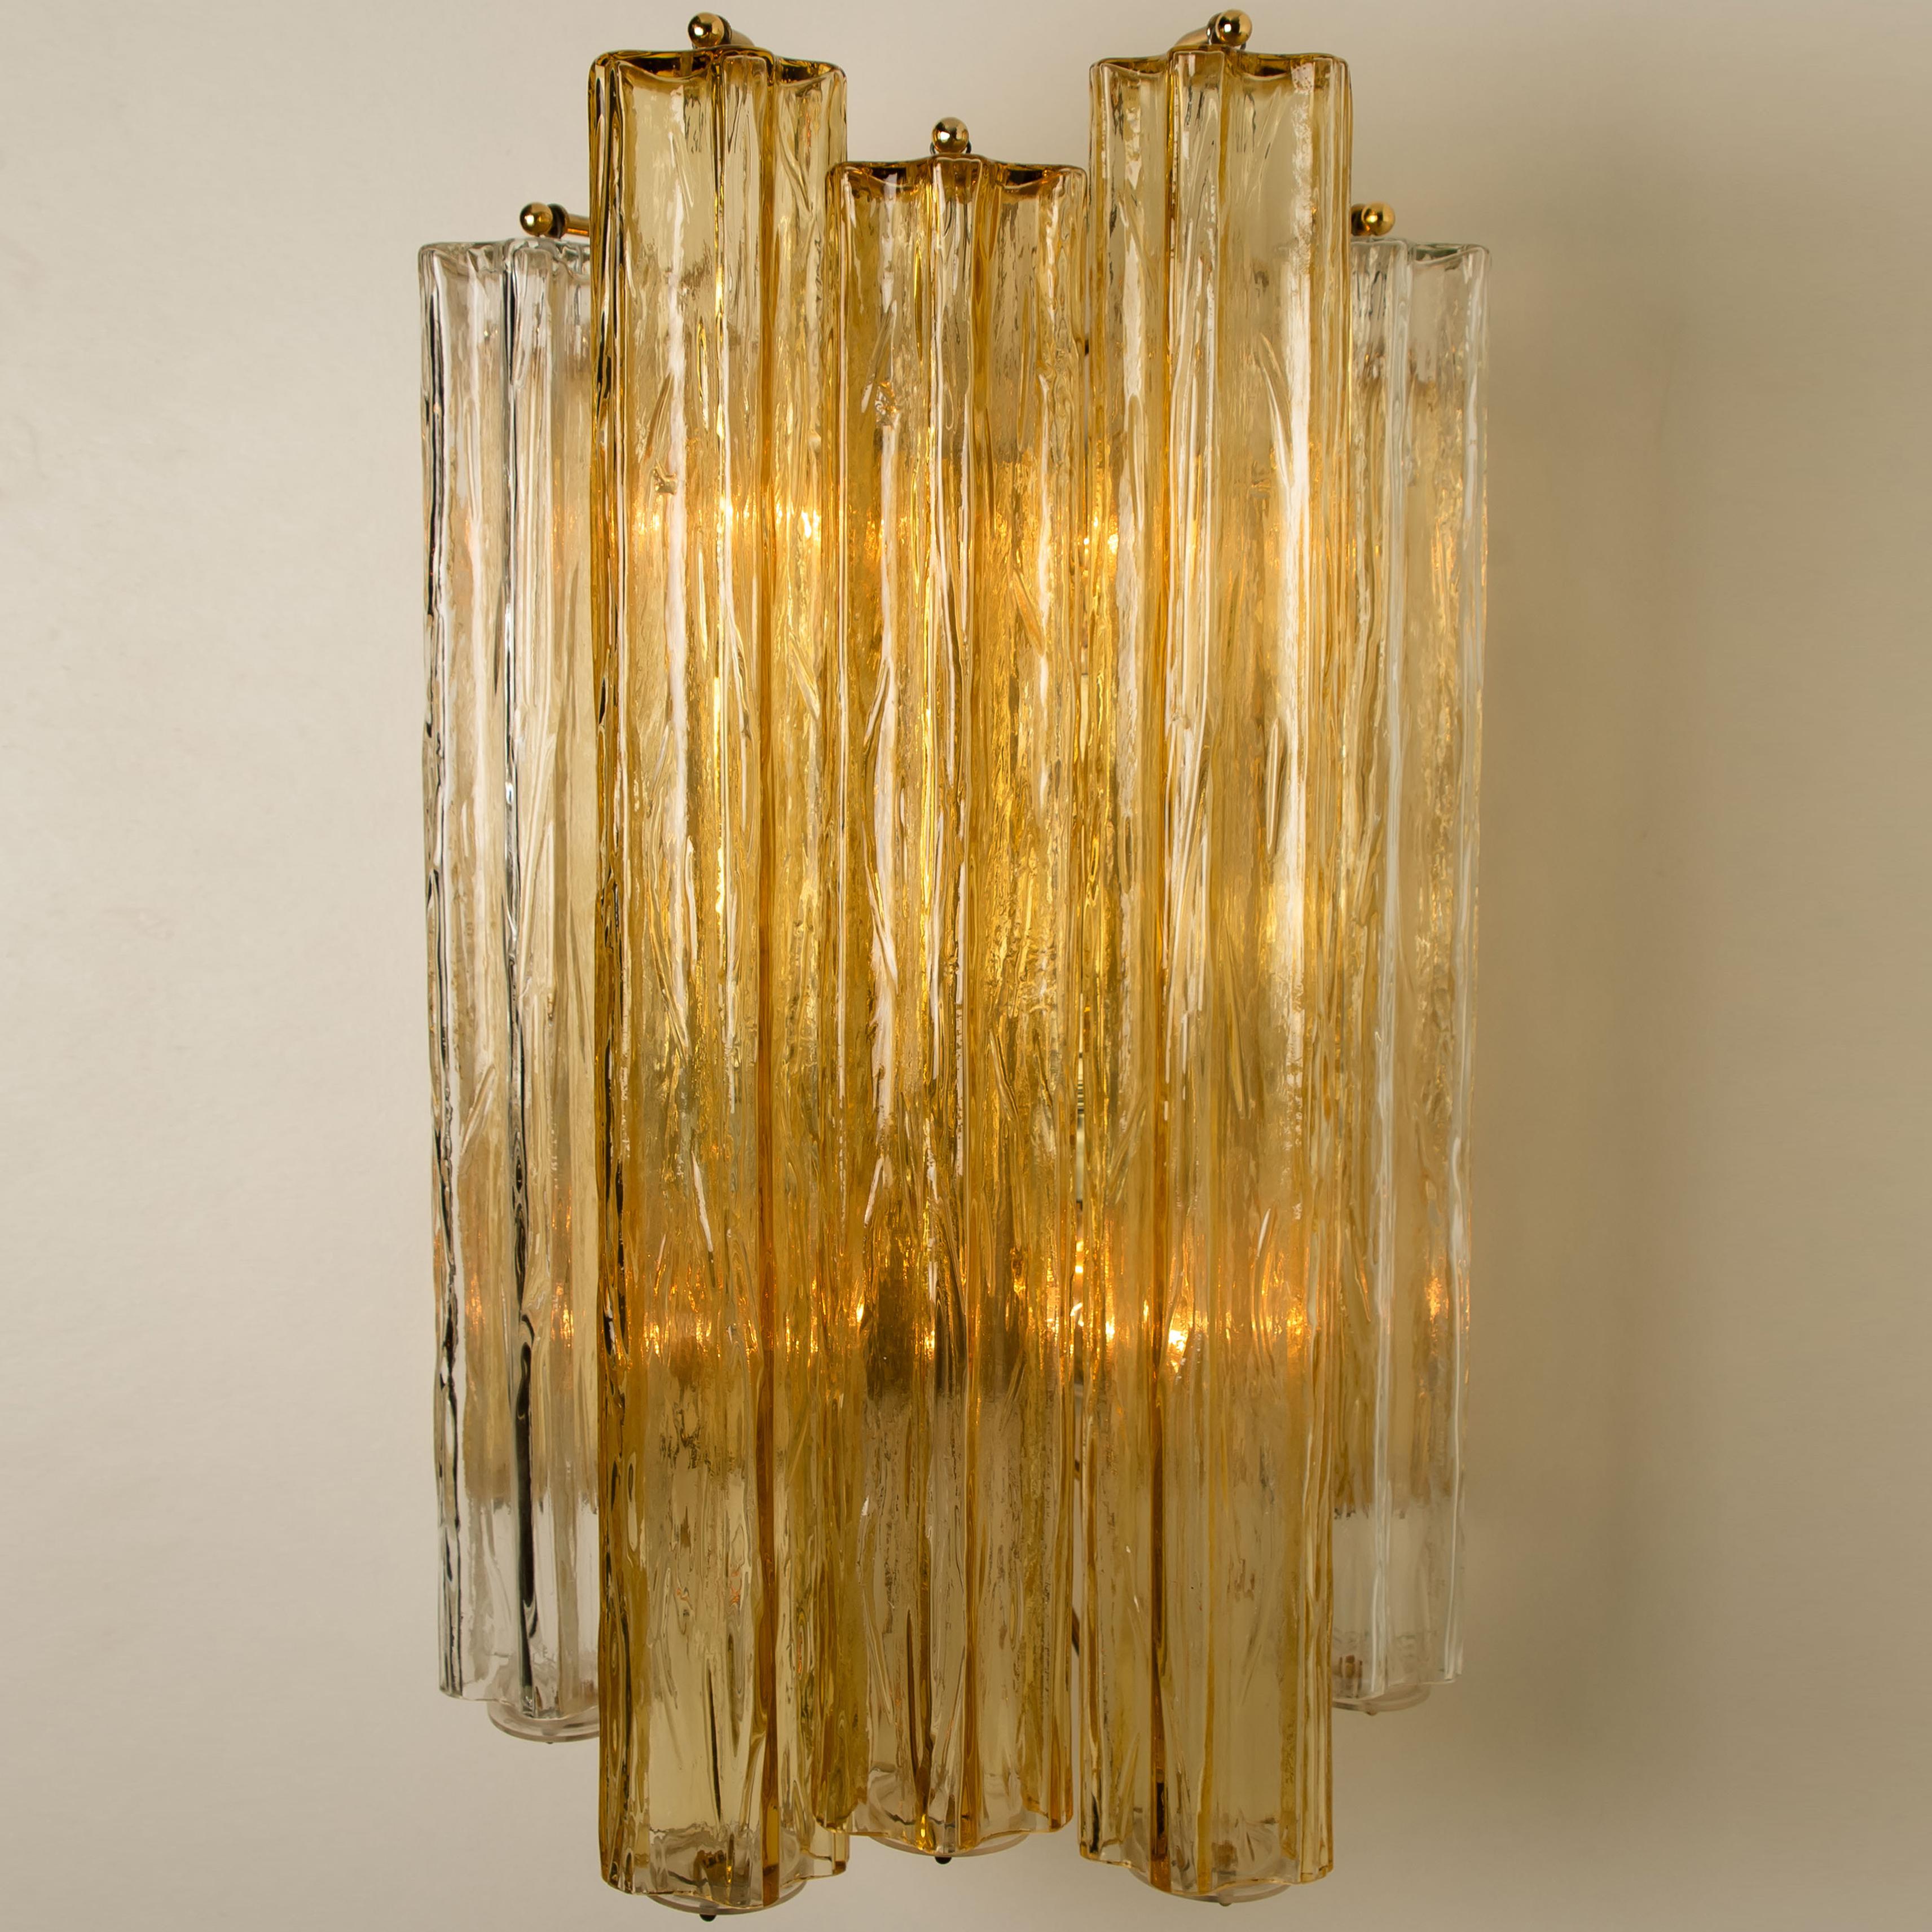 2 of the 2 Extra Large Wall Sconces or Wall Lights Murano Glass, Barovier & Toso 5